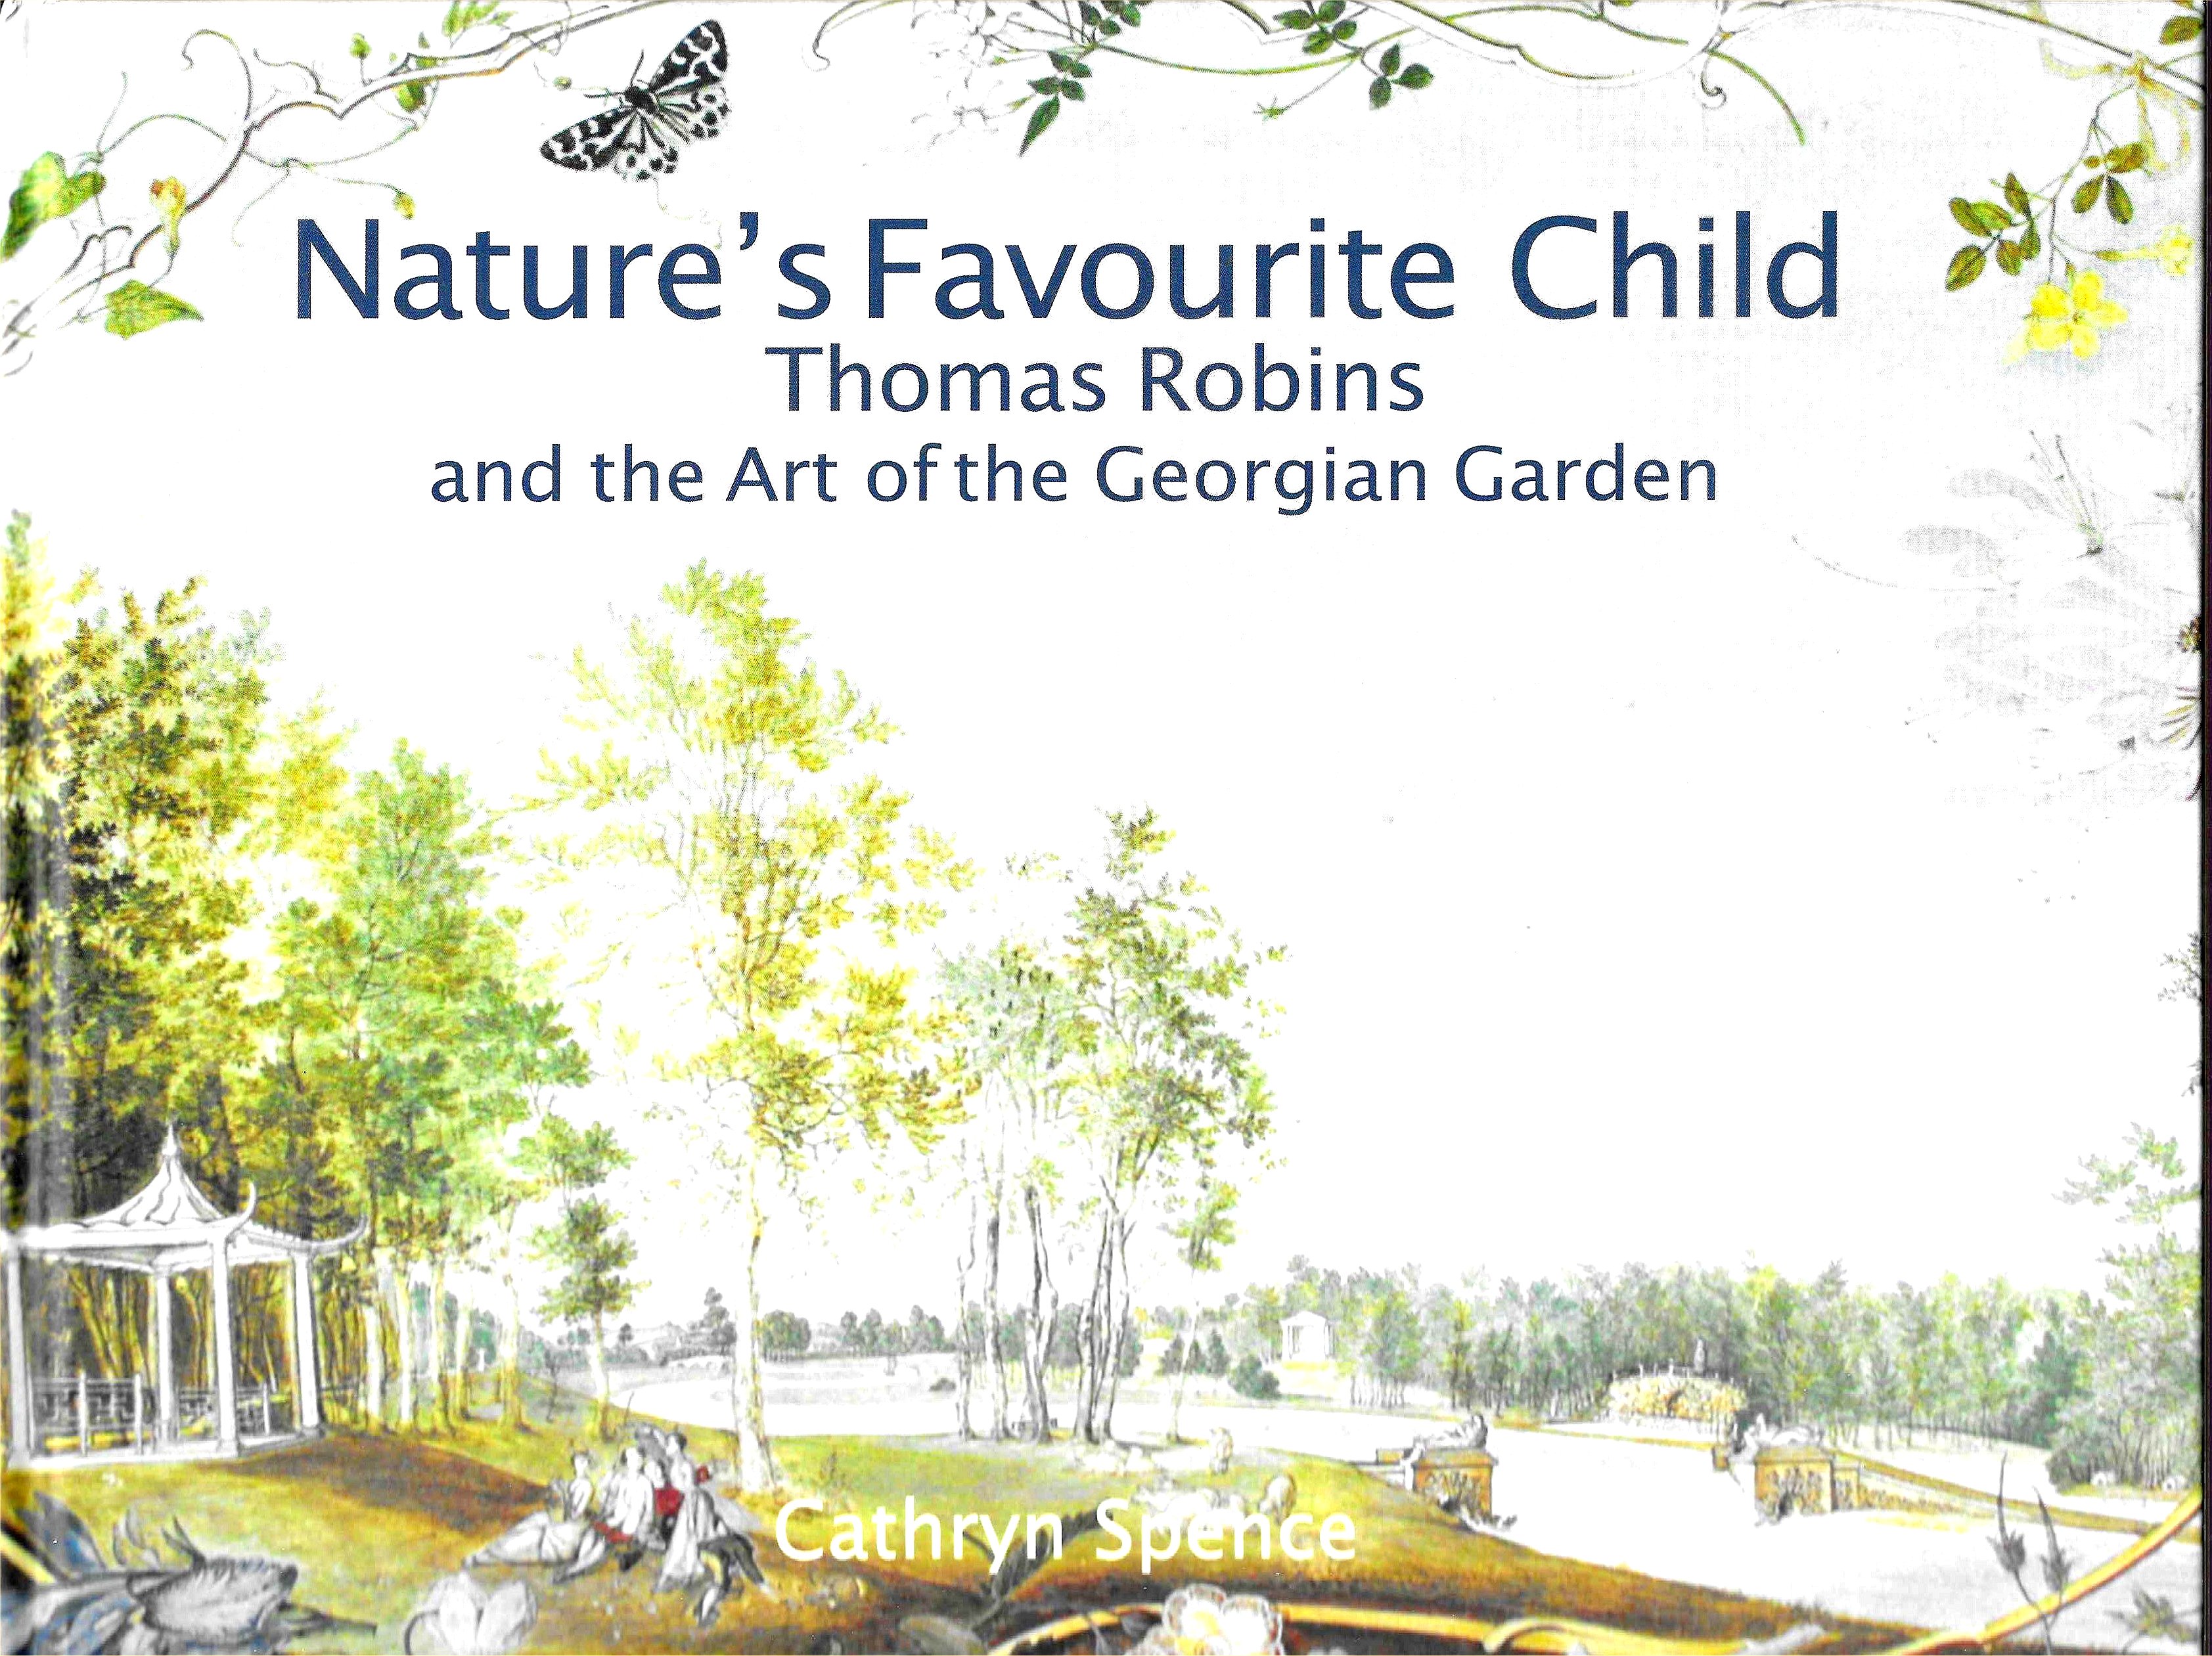 Nature’ s Favourite Child - Thomas Robins and the Art of the Georgian Garden